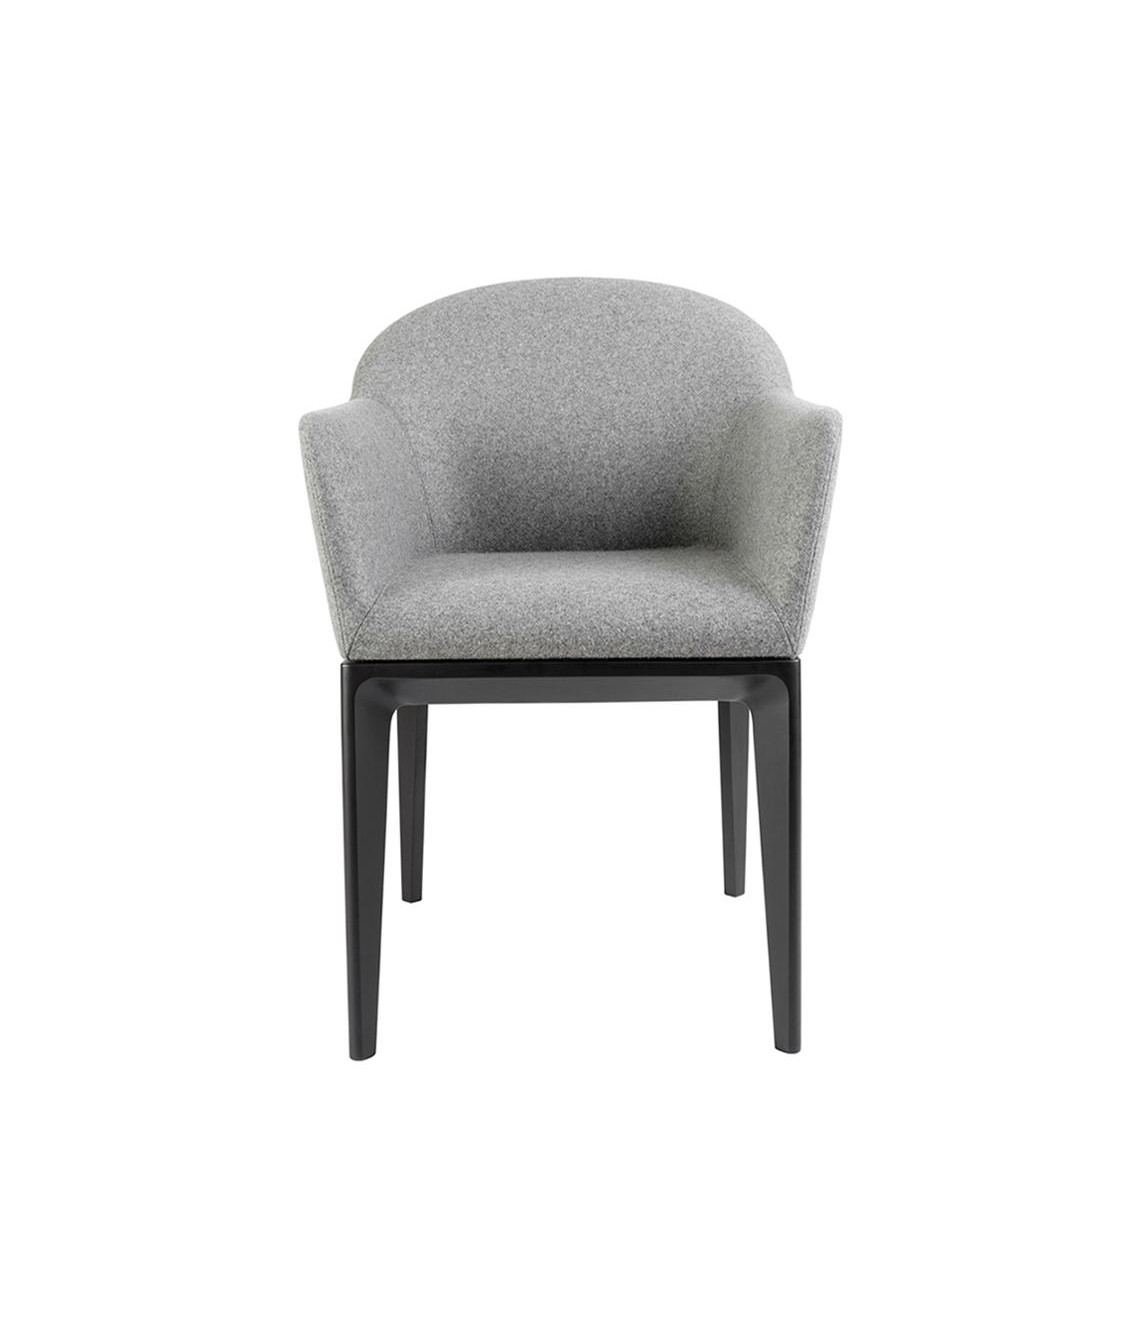 Best Luxury Upholstered Dining Chair With Armrest / Custom Hotel Furniture wholesale